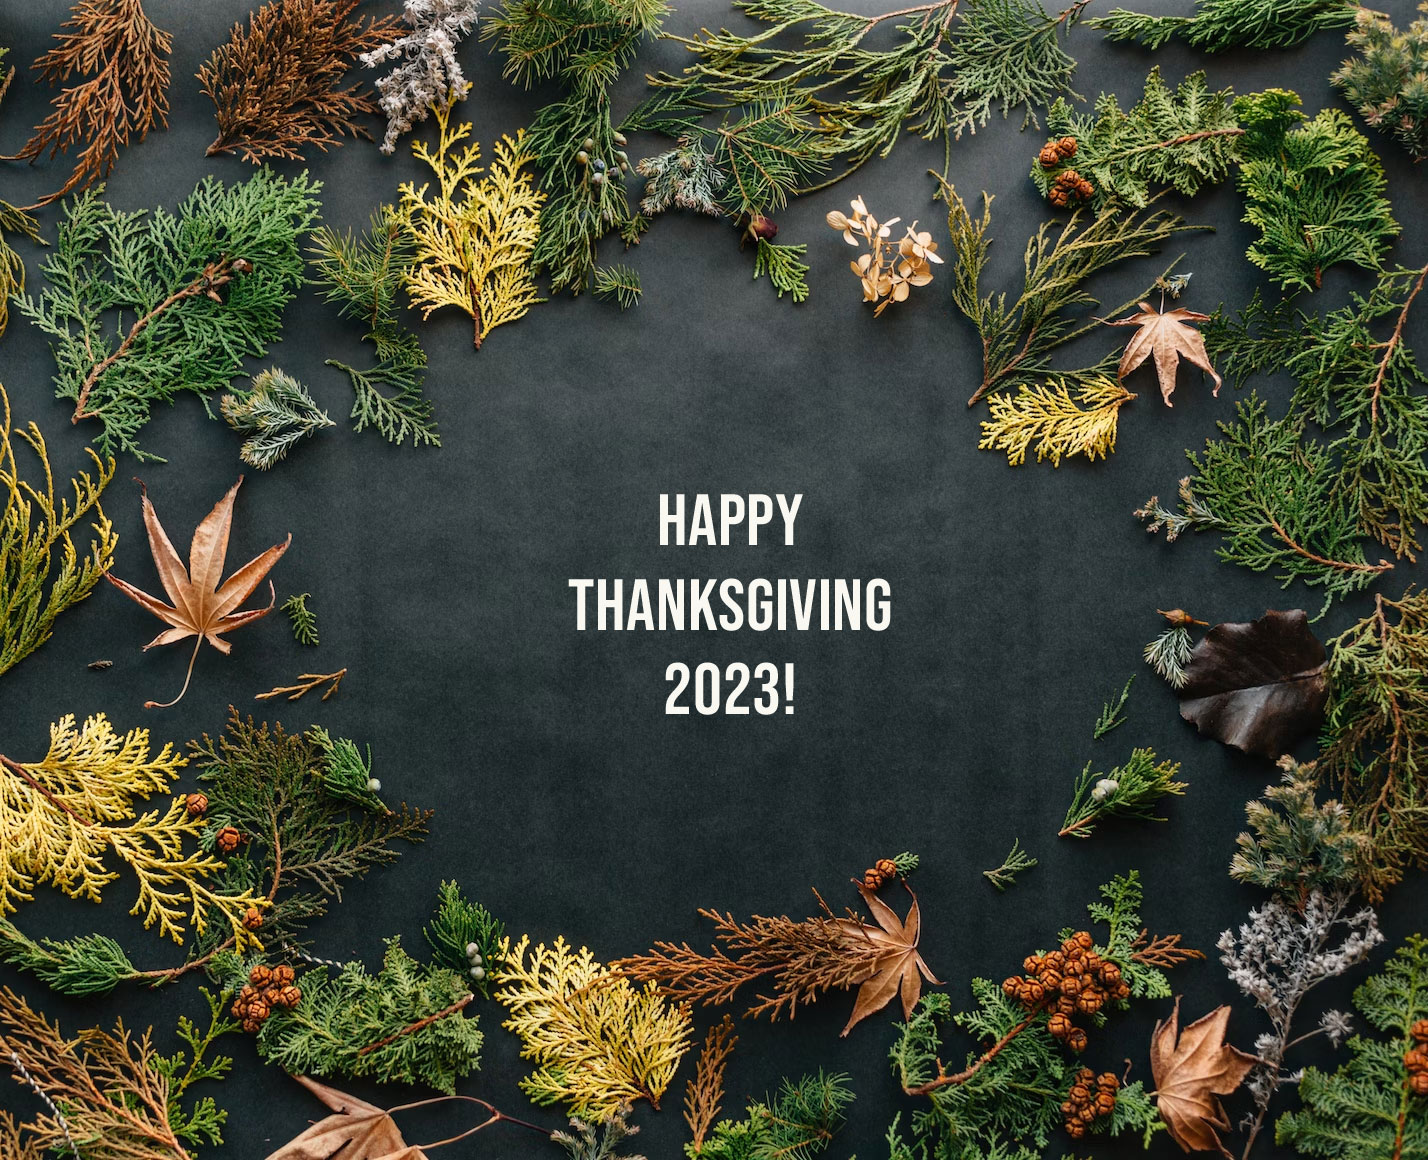 Canadian Thanksgiving in 2023/2024 - When, Where, Why, How is Celebrated?